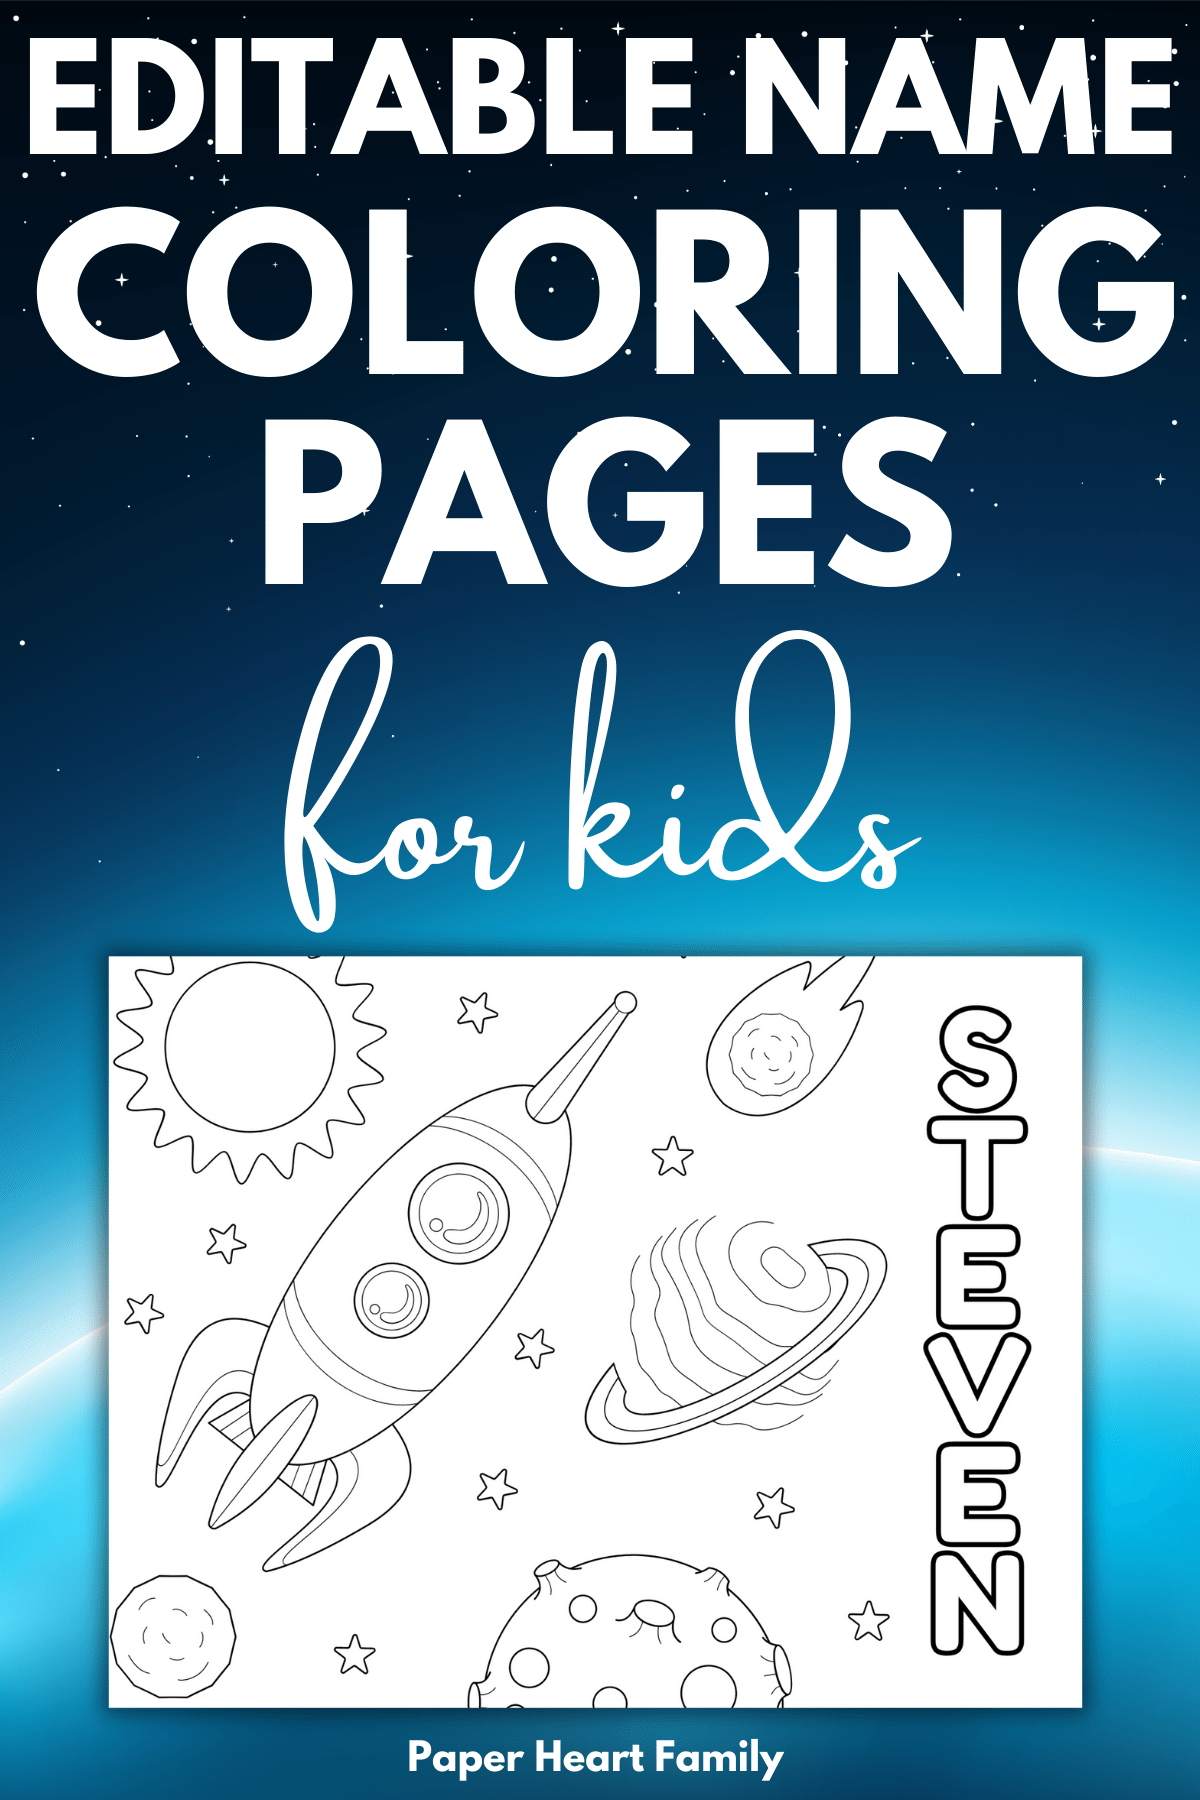 Outer space coloring page with name Steven